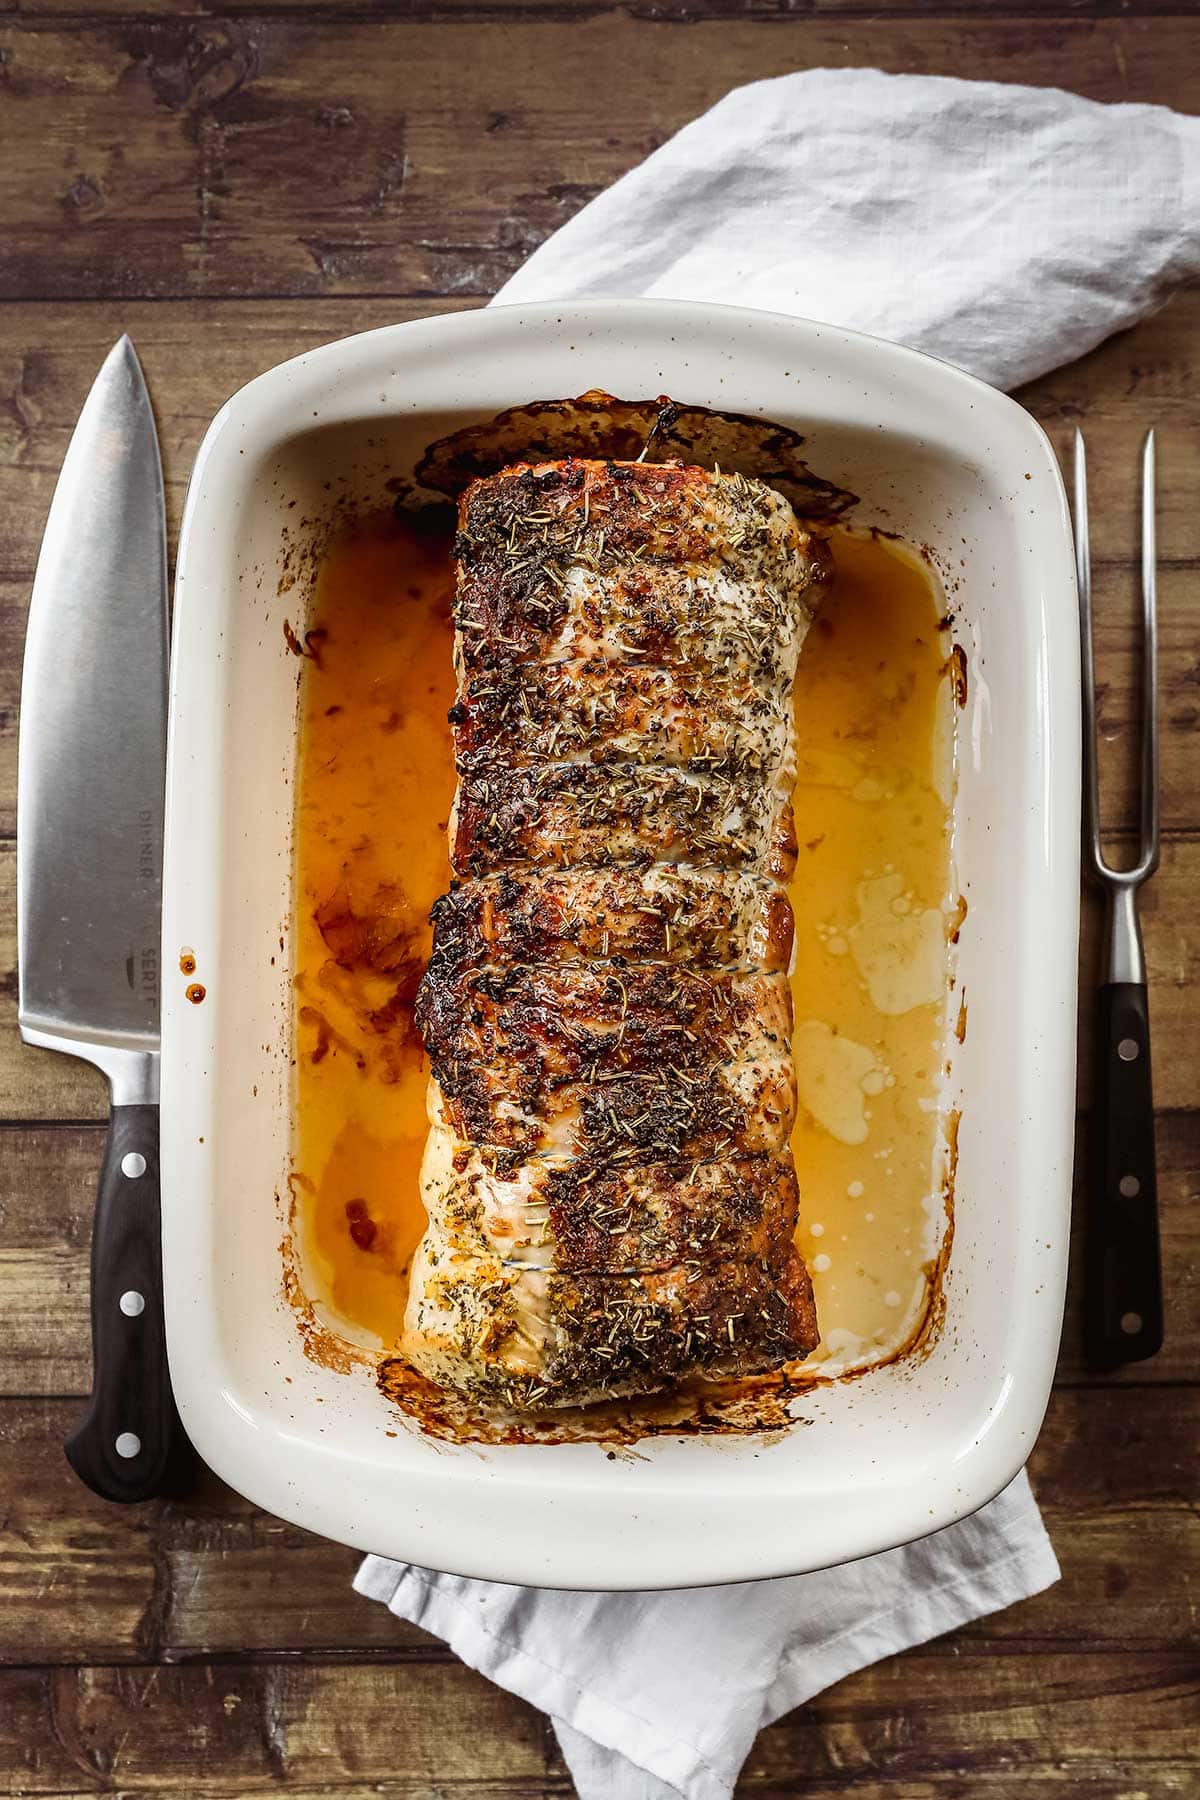 Herb Crusted Pork Loin in baking dish after baking